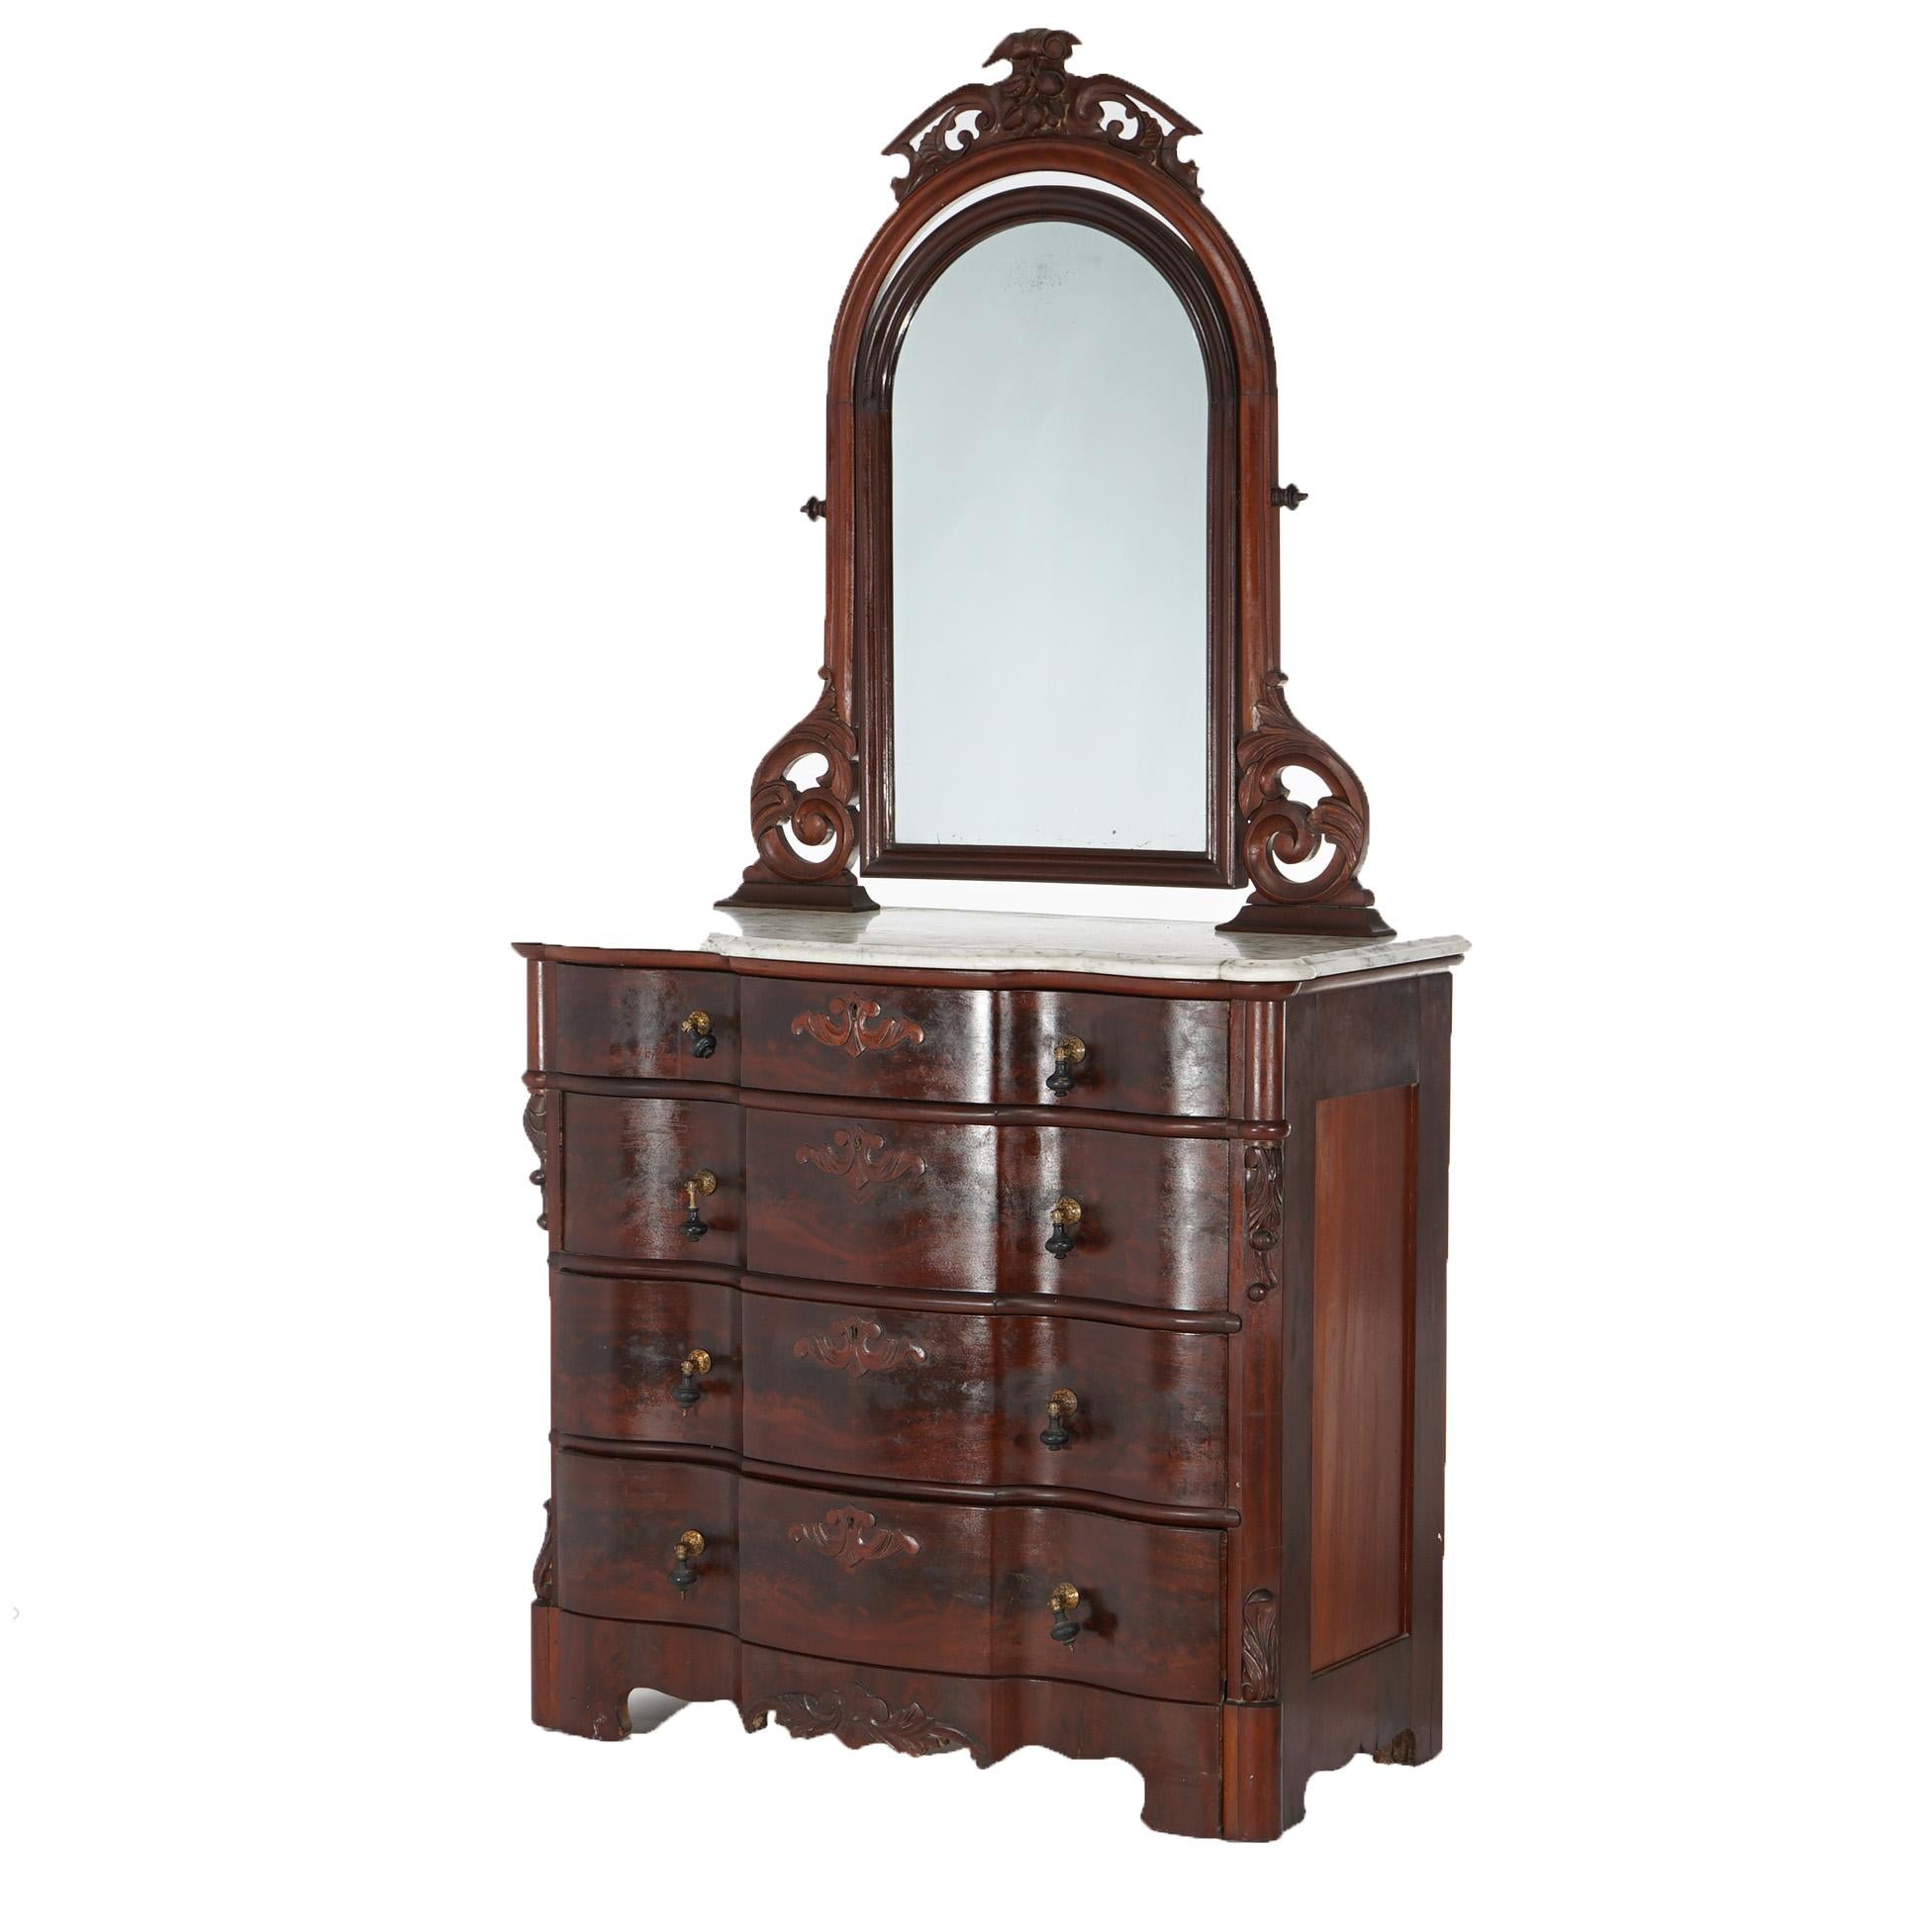 An antique Victorian dresser offers flame mahogany construction in swell front form with beveled marble top over four long drawers with flanking carved elements; mirror with carved mahogany frame having scroll form crest with fruit and nut elements,